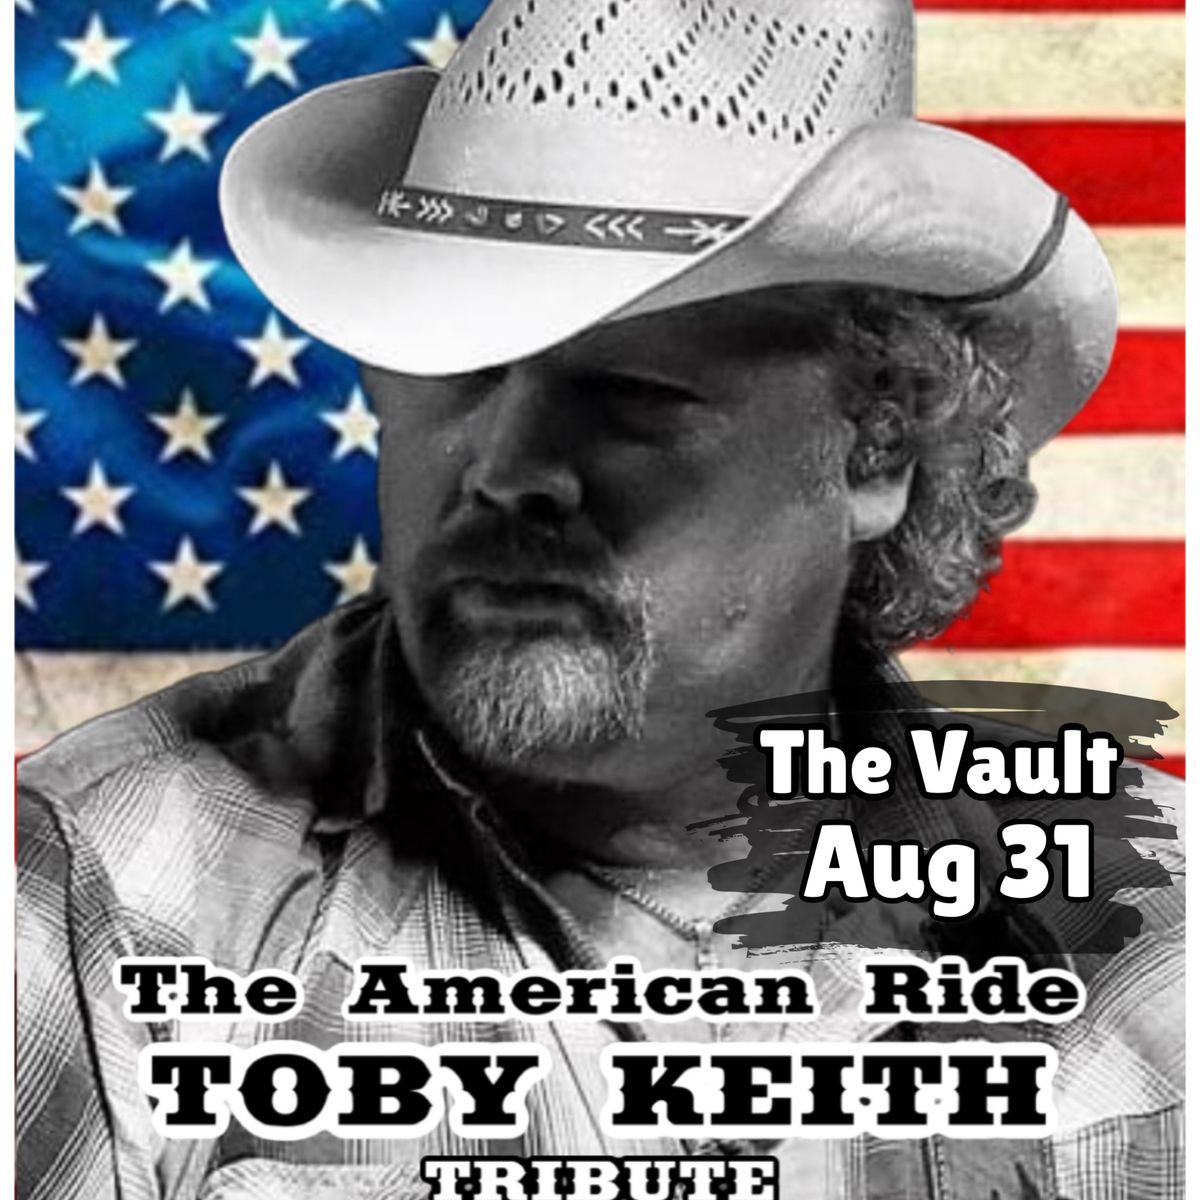 The American Ride at The Vault